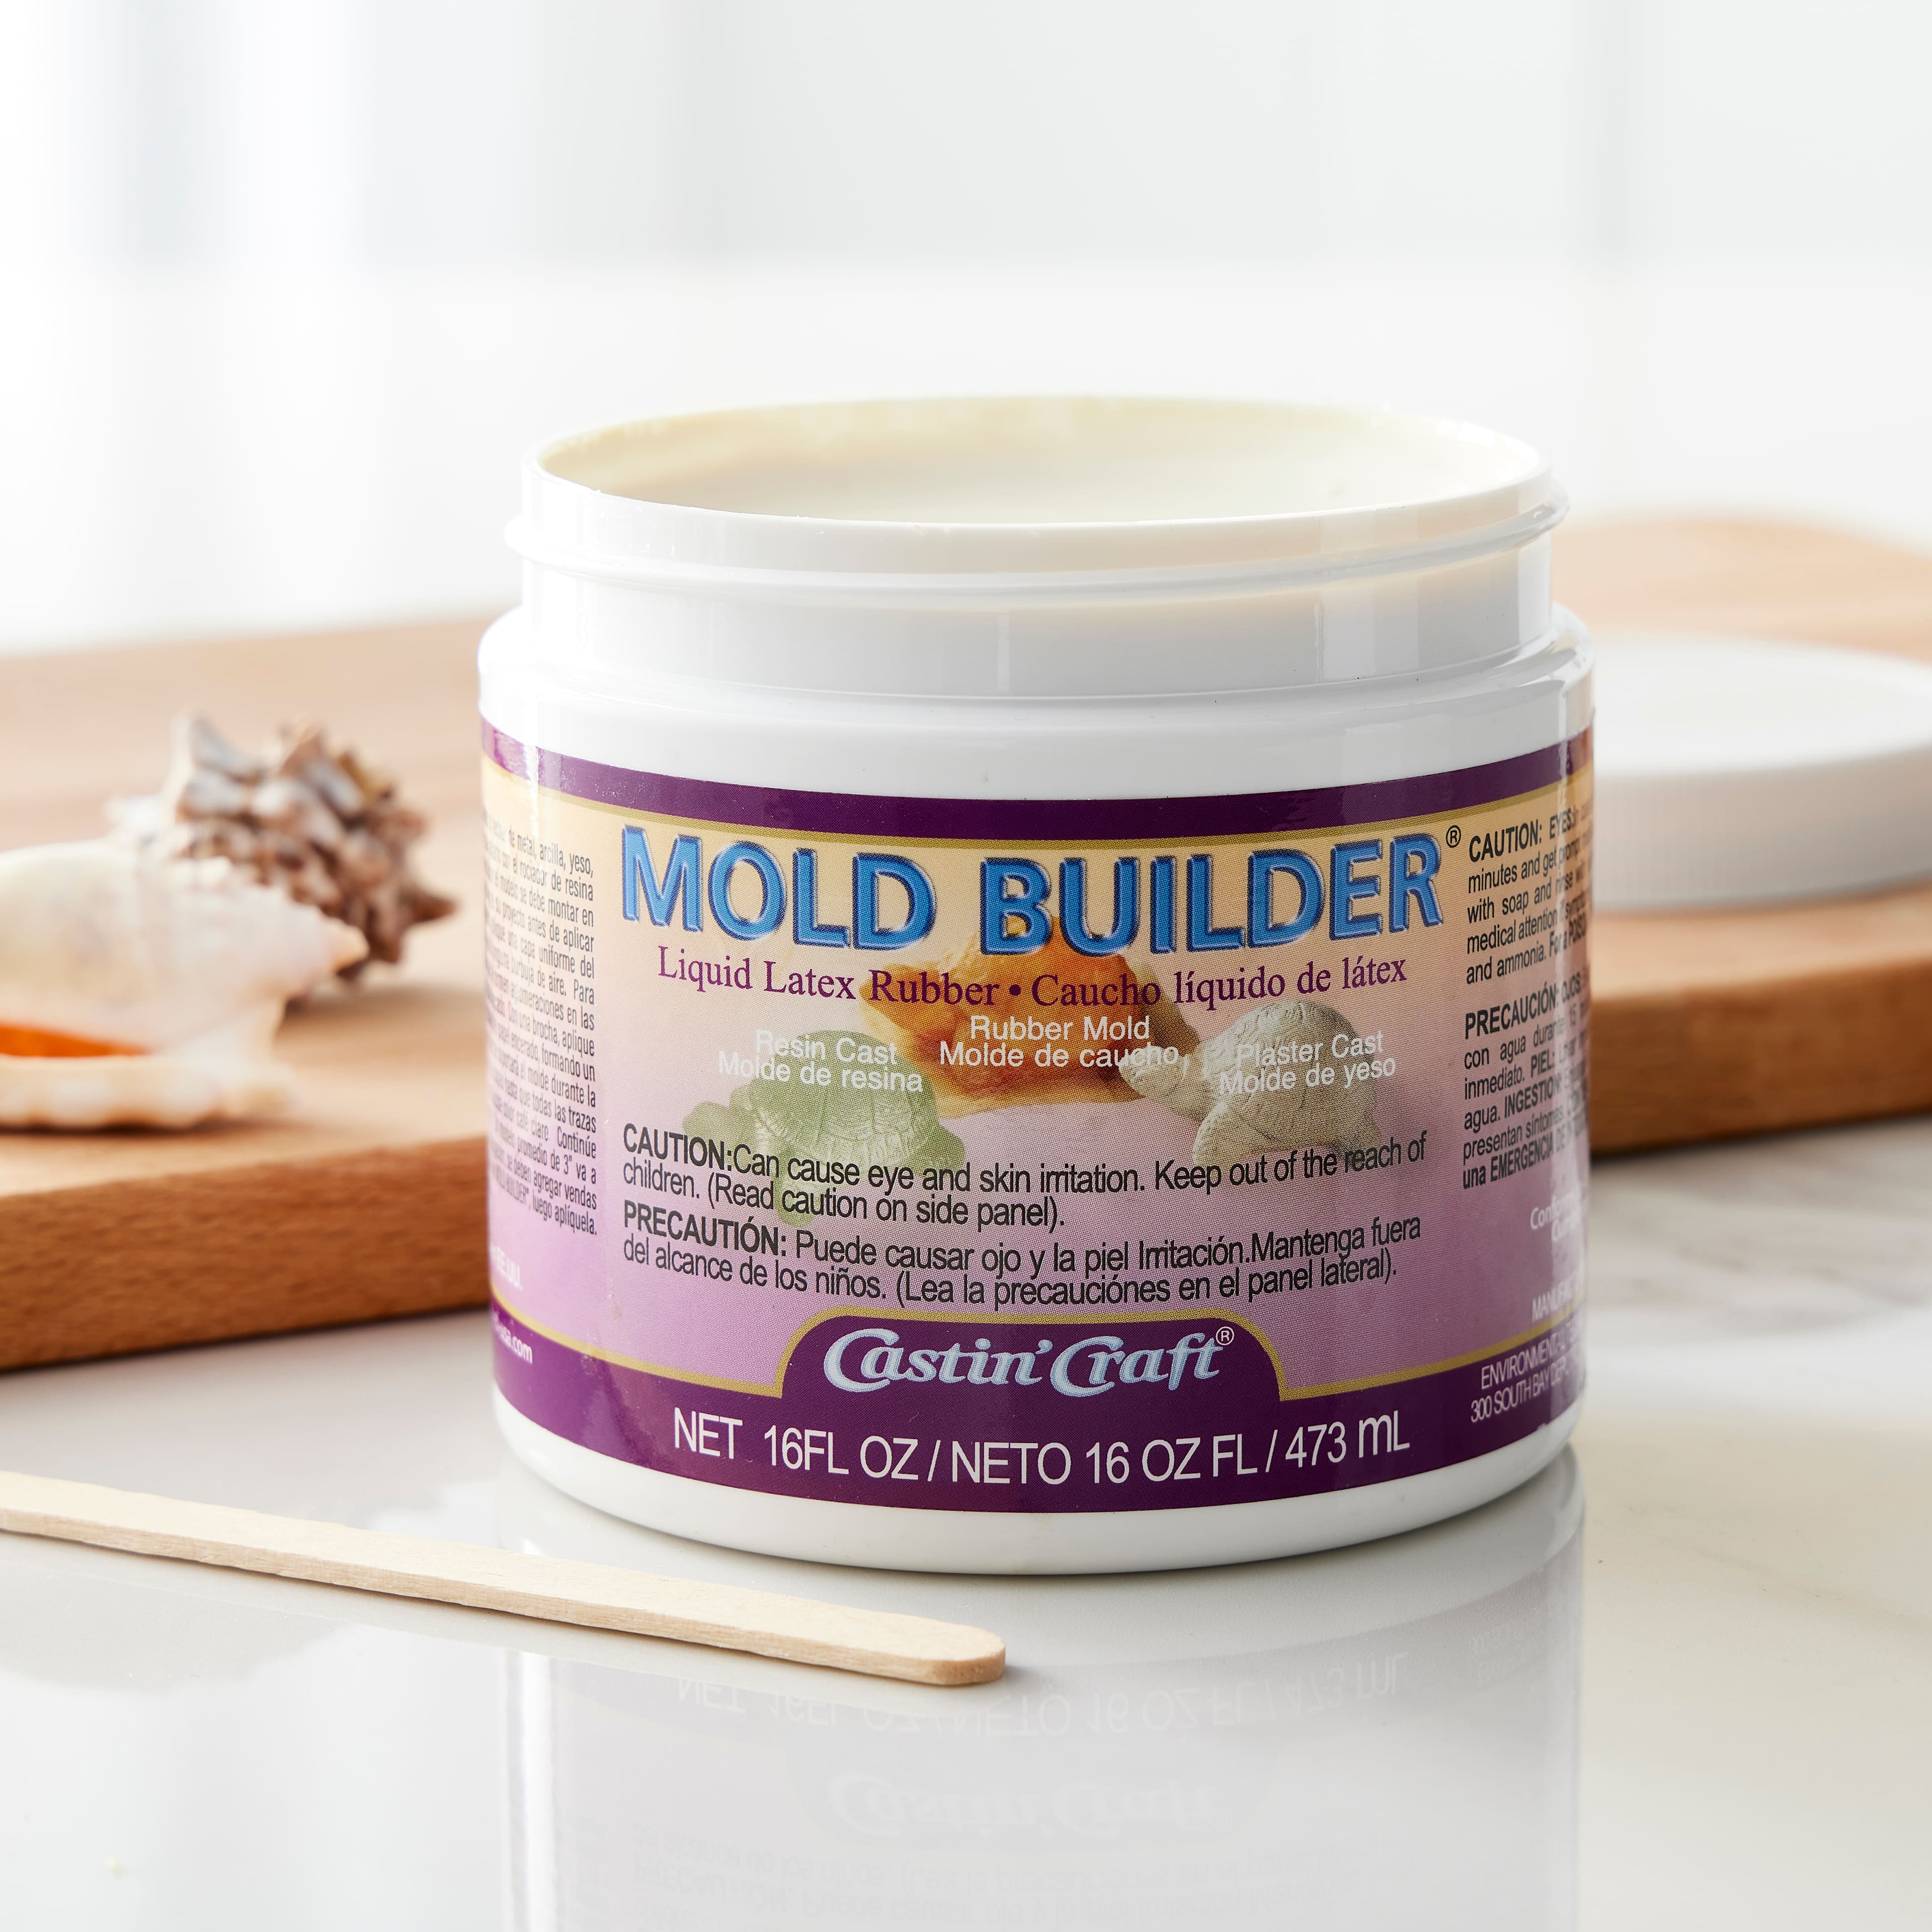 How to Use Mold Builder Liquid Latex Rubber, art of sculpture, figurine,  natural rubber, plaster, molding